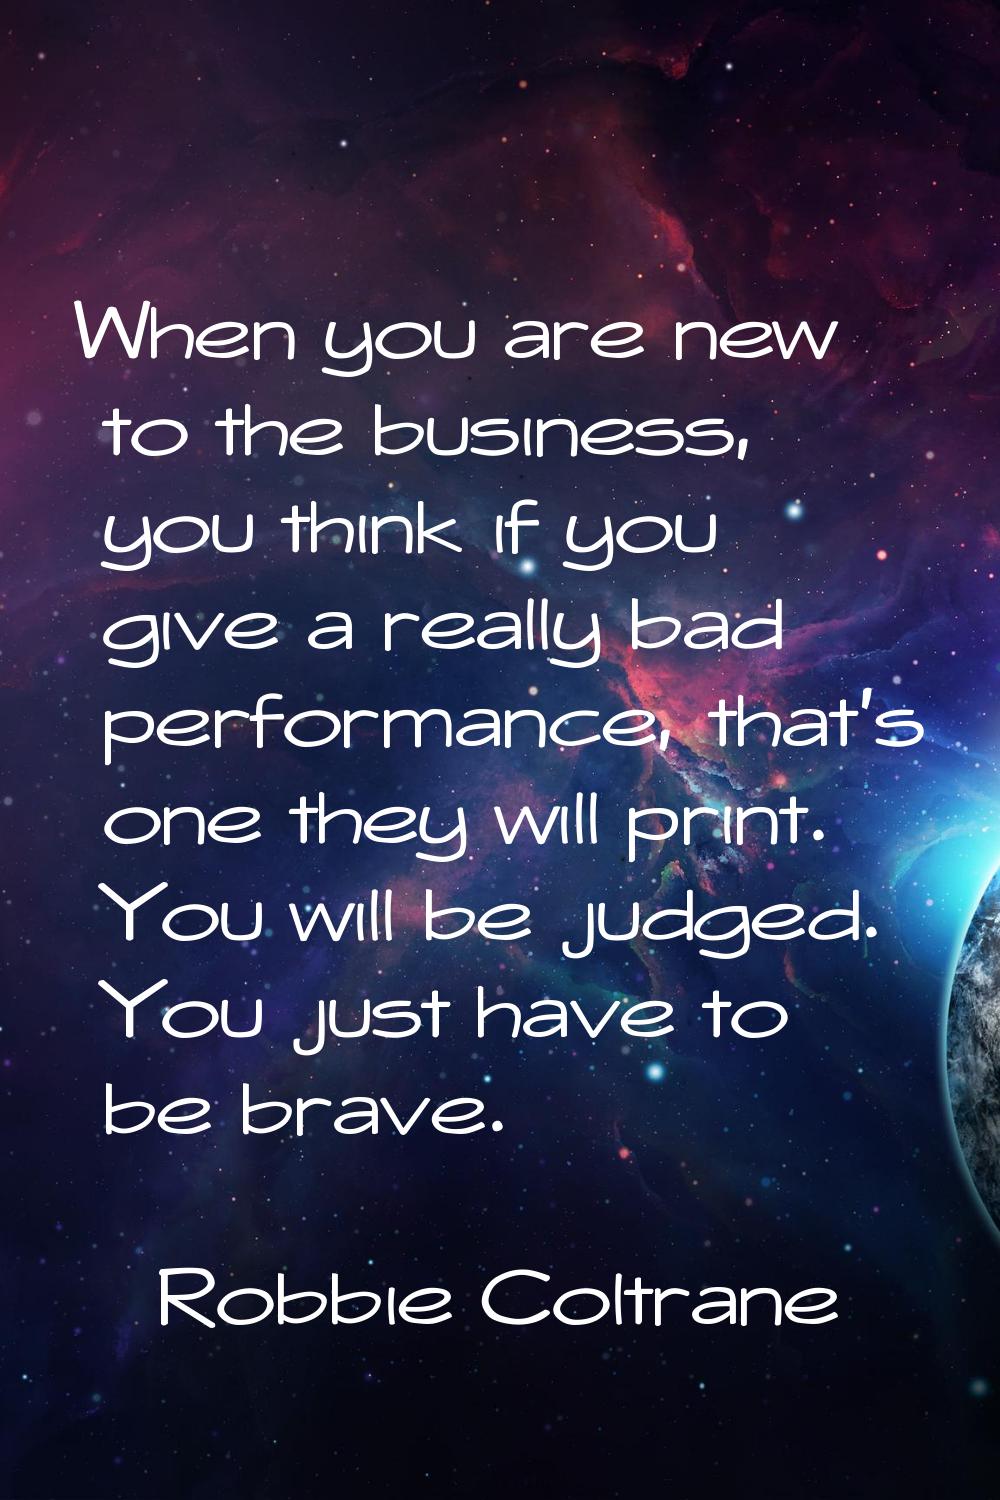 When you are new to the business, you think if you give a really bad performance, that's one they w